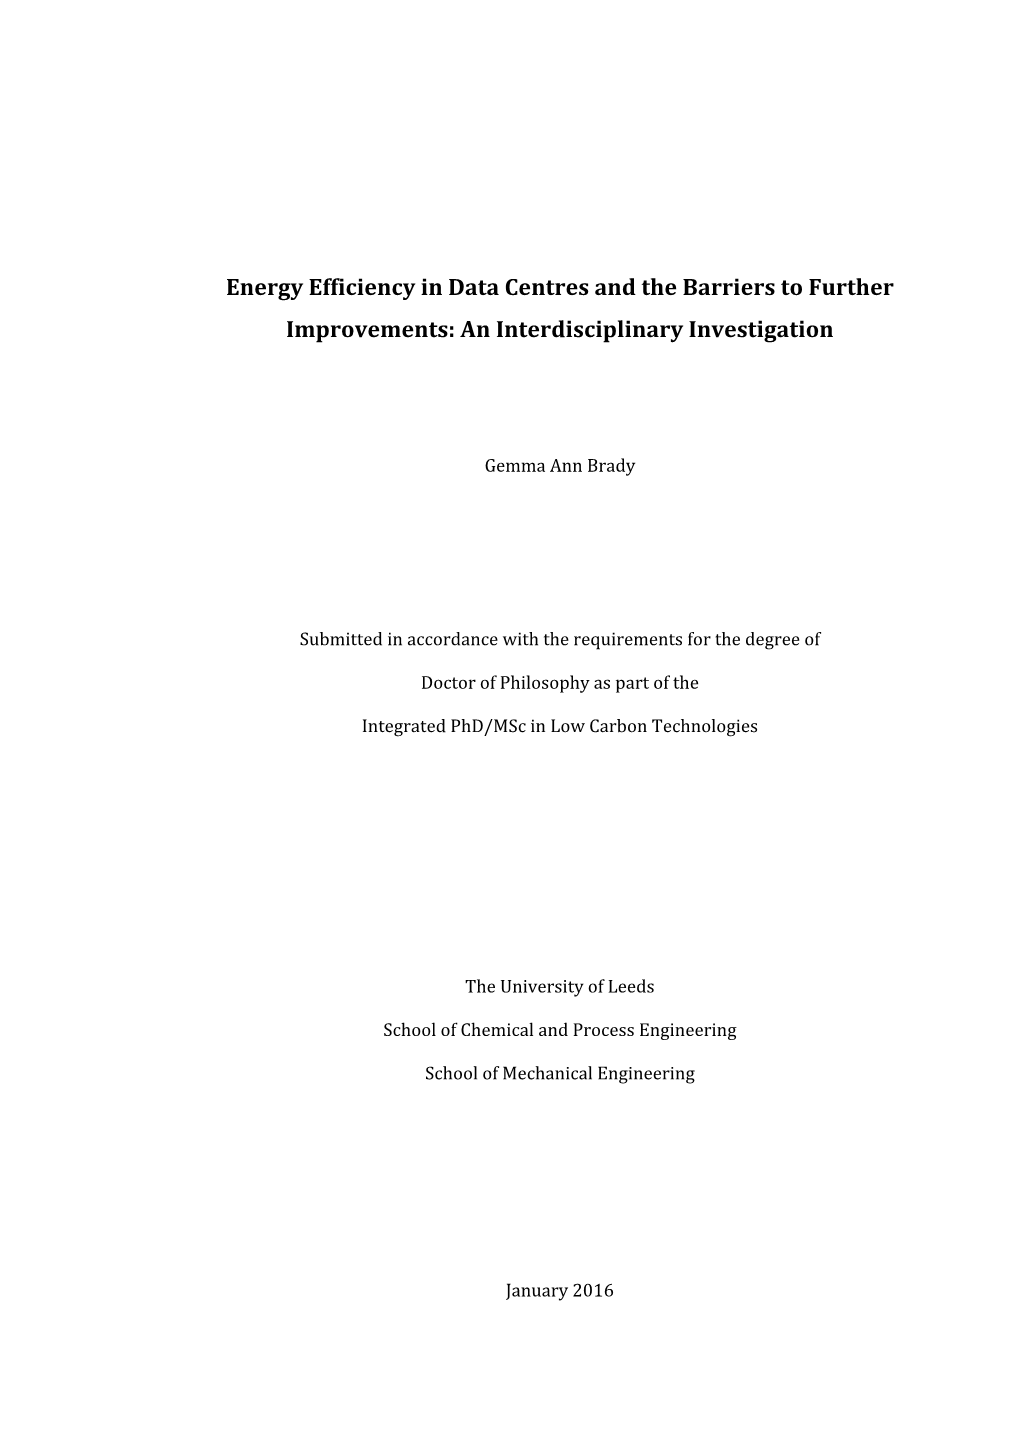 Energy Efficiency in Data Centres and the Barriers to Further Improvements: an Interdisciplinary Investigation